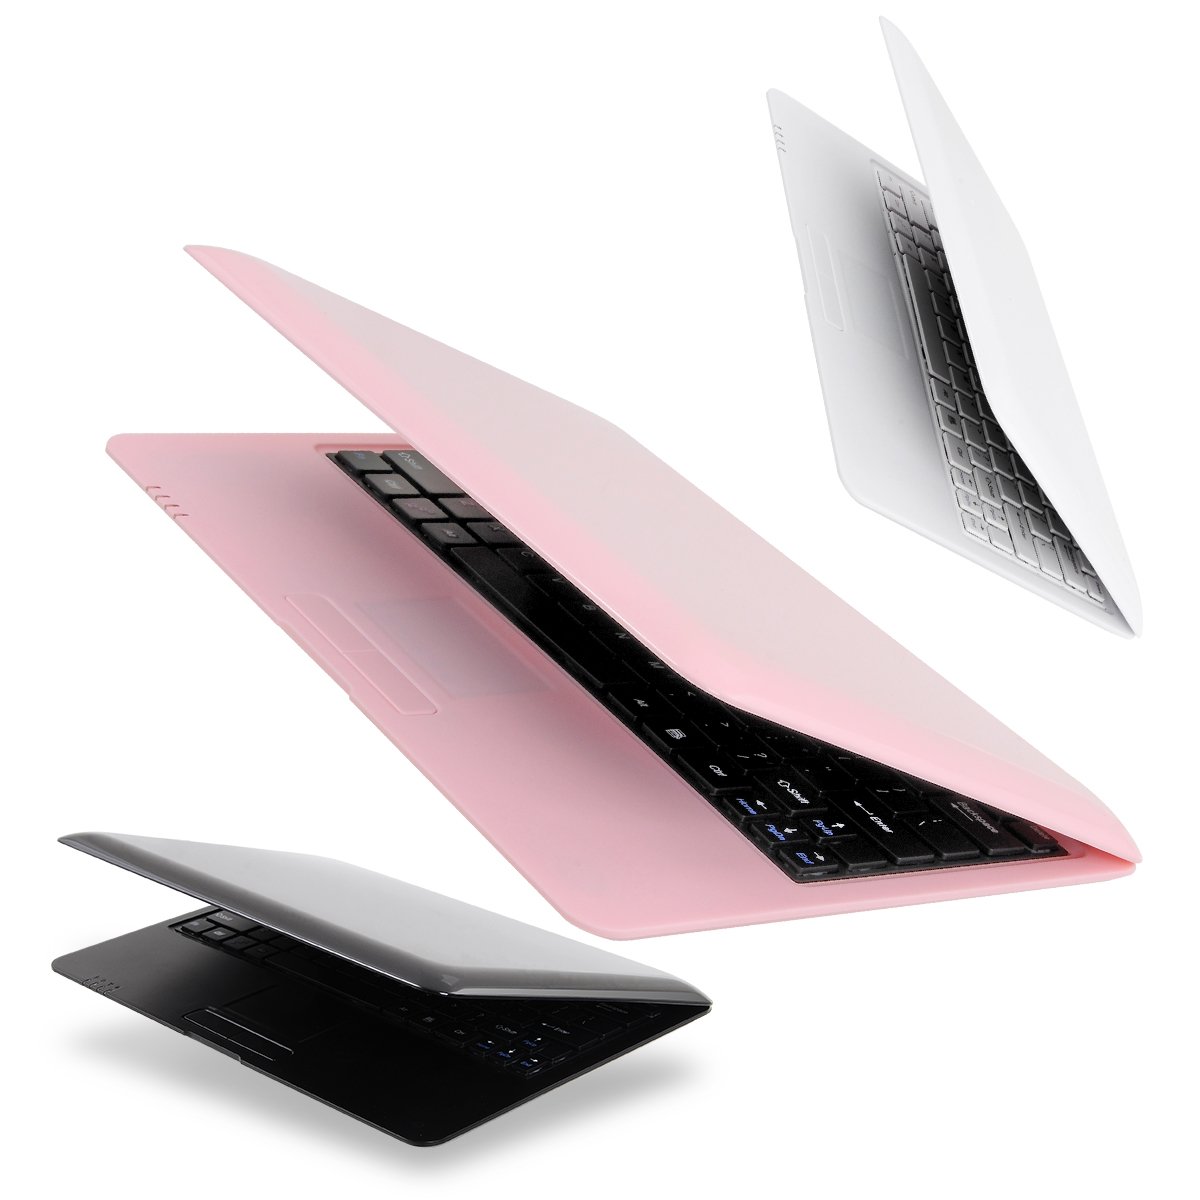 Goldengulf 10.1 Inch Portable 8GB Computer Laptop PC Quad Core Android 6.0 Mini Netbook Slim and Lightweight Notebook Webcam Netflix YouTube Google Player Flash (Pink)